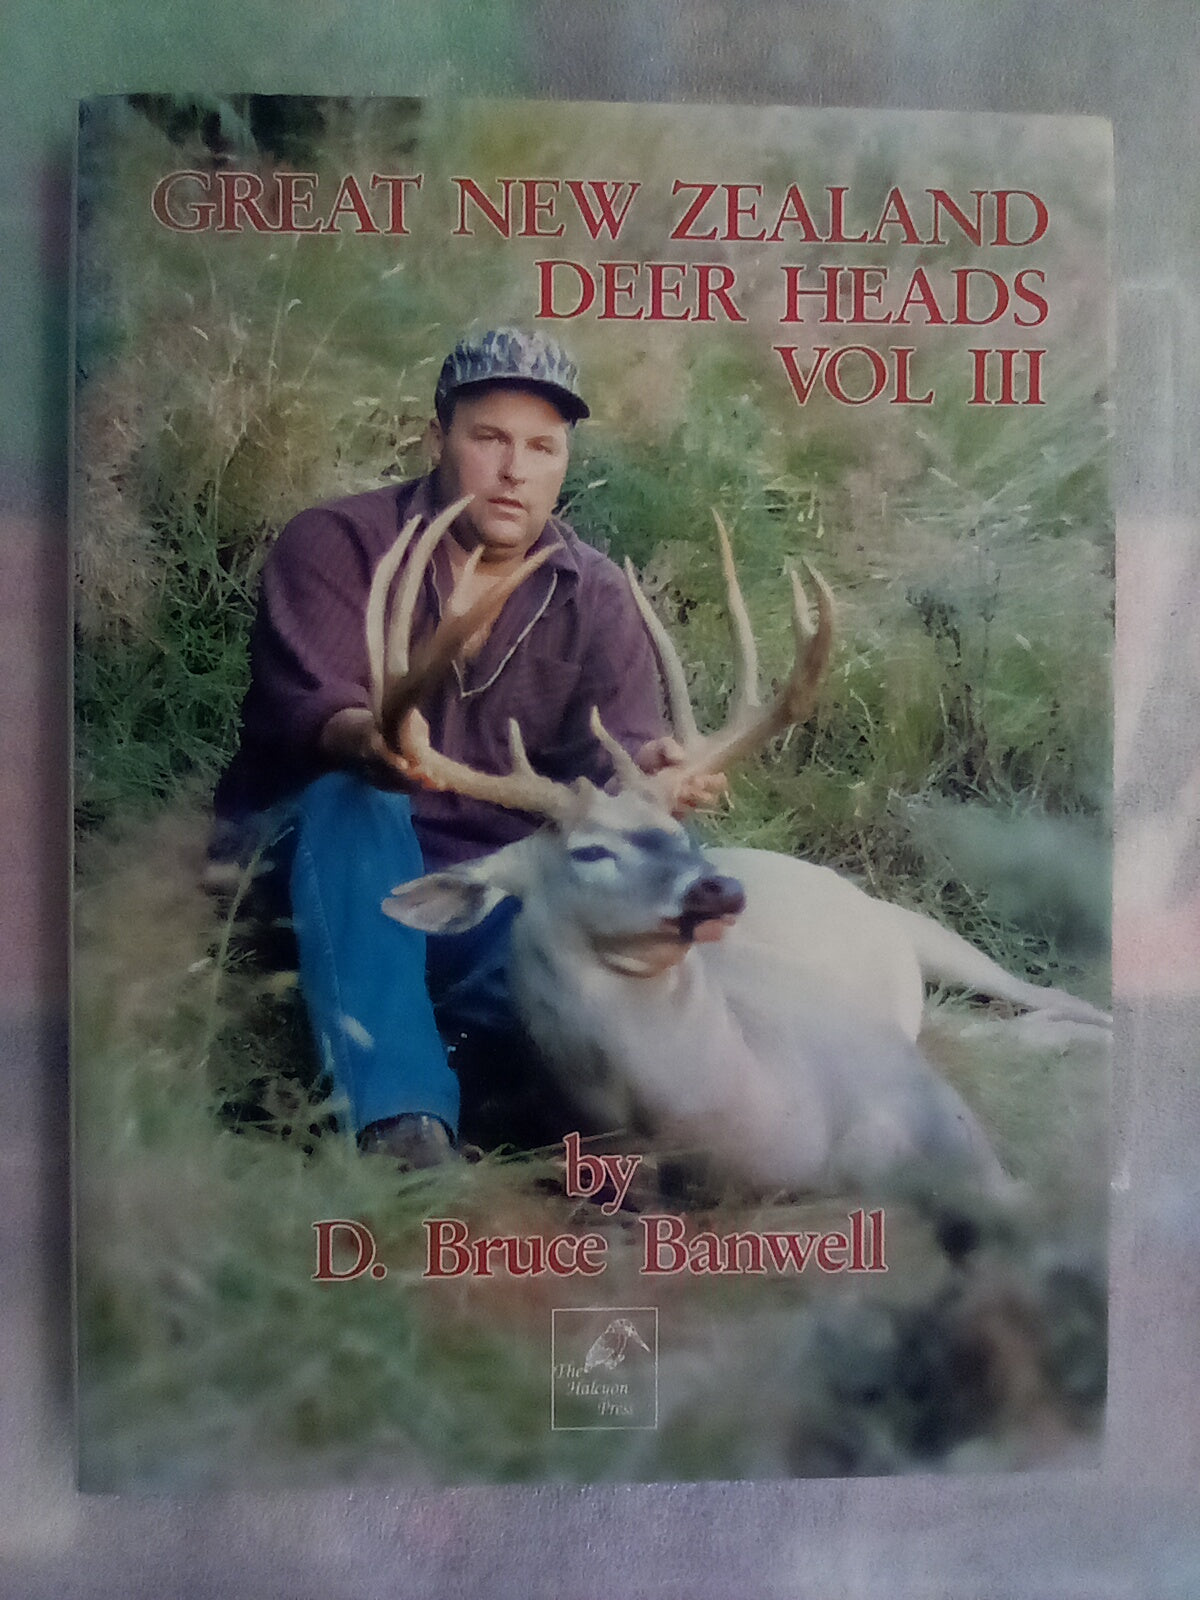 Great New Zealand Deer Heads Vol. 3 by Bruce Banwell